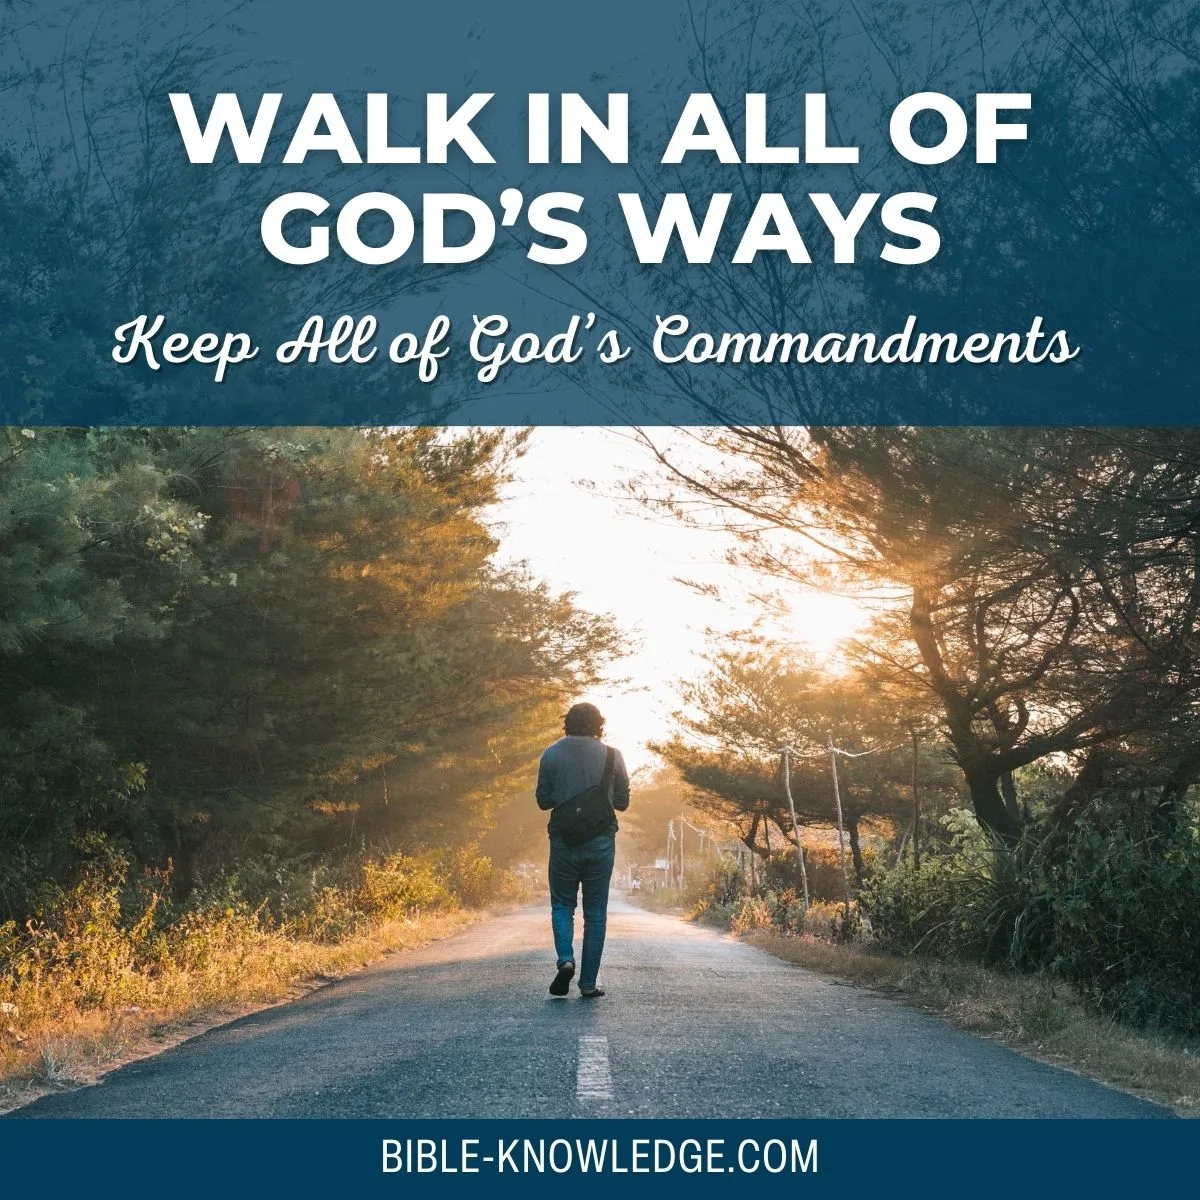 Walk in All of God's Ways - Keep All of God's Commandments